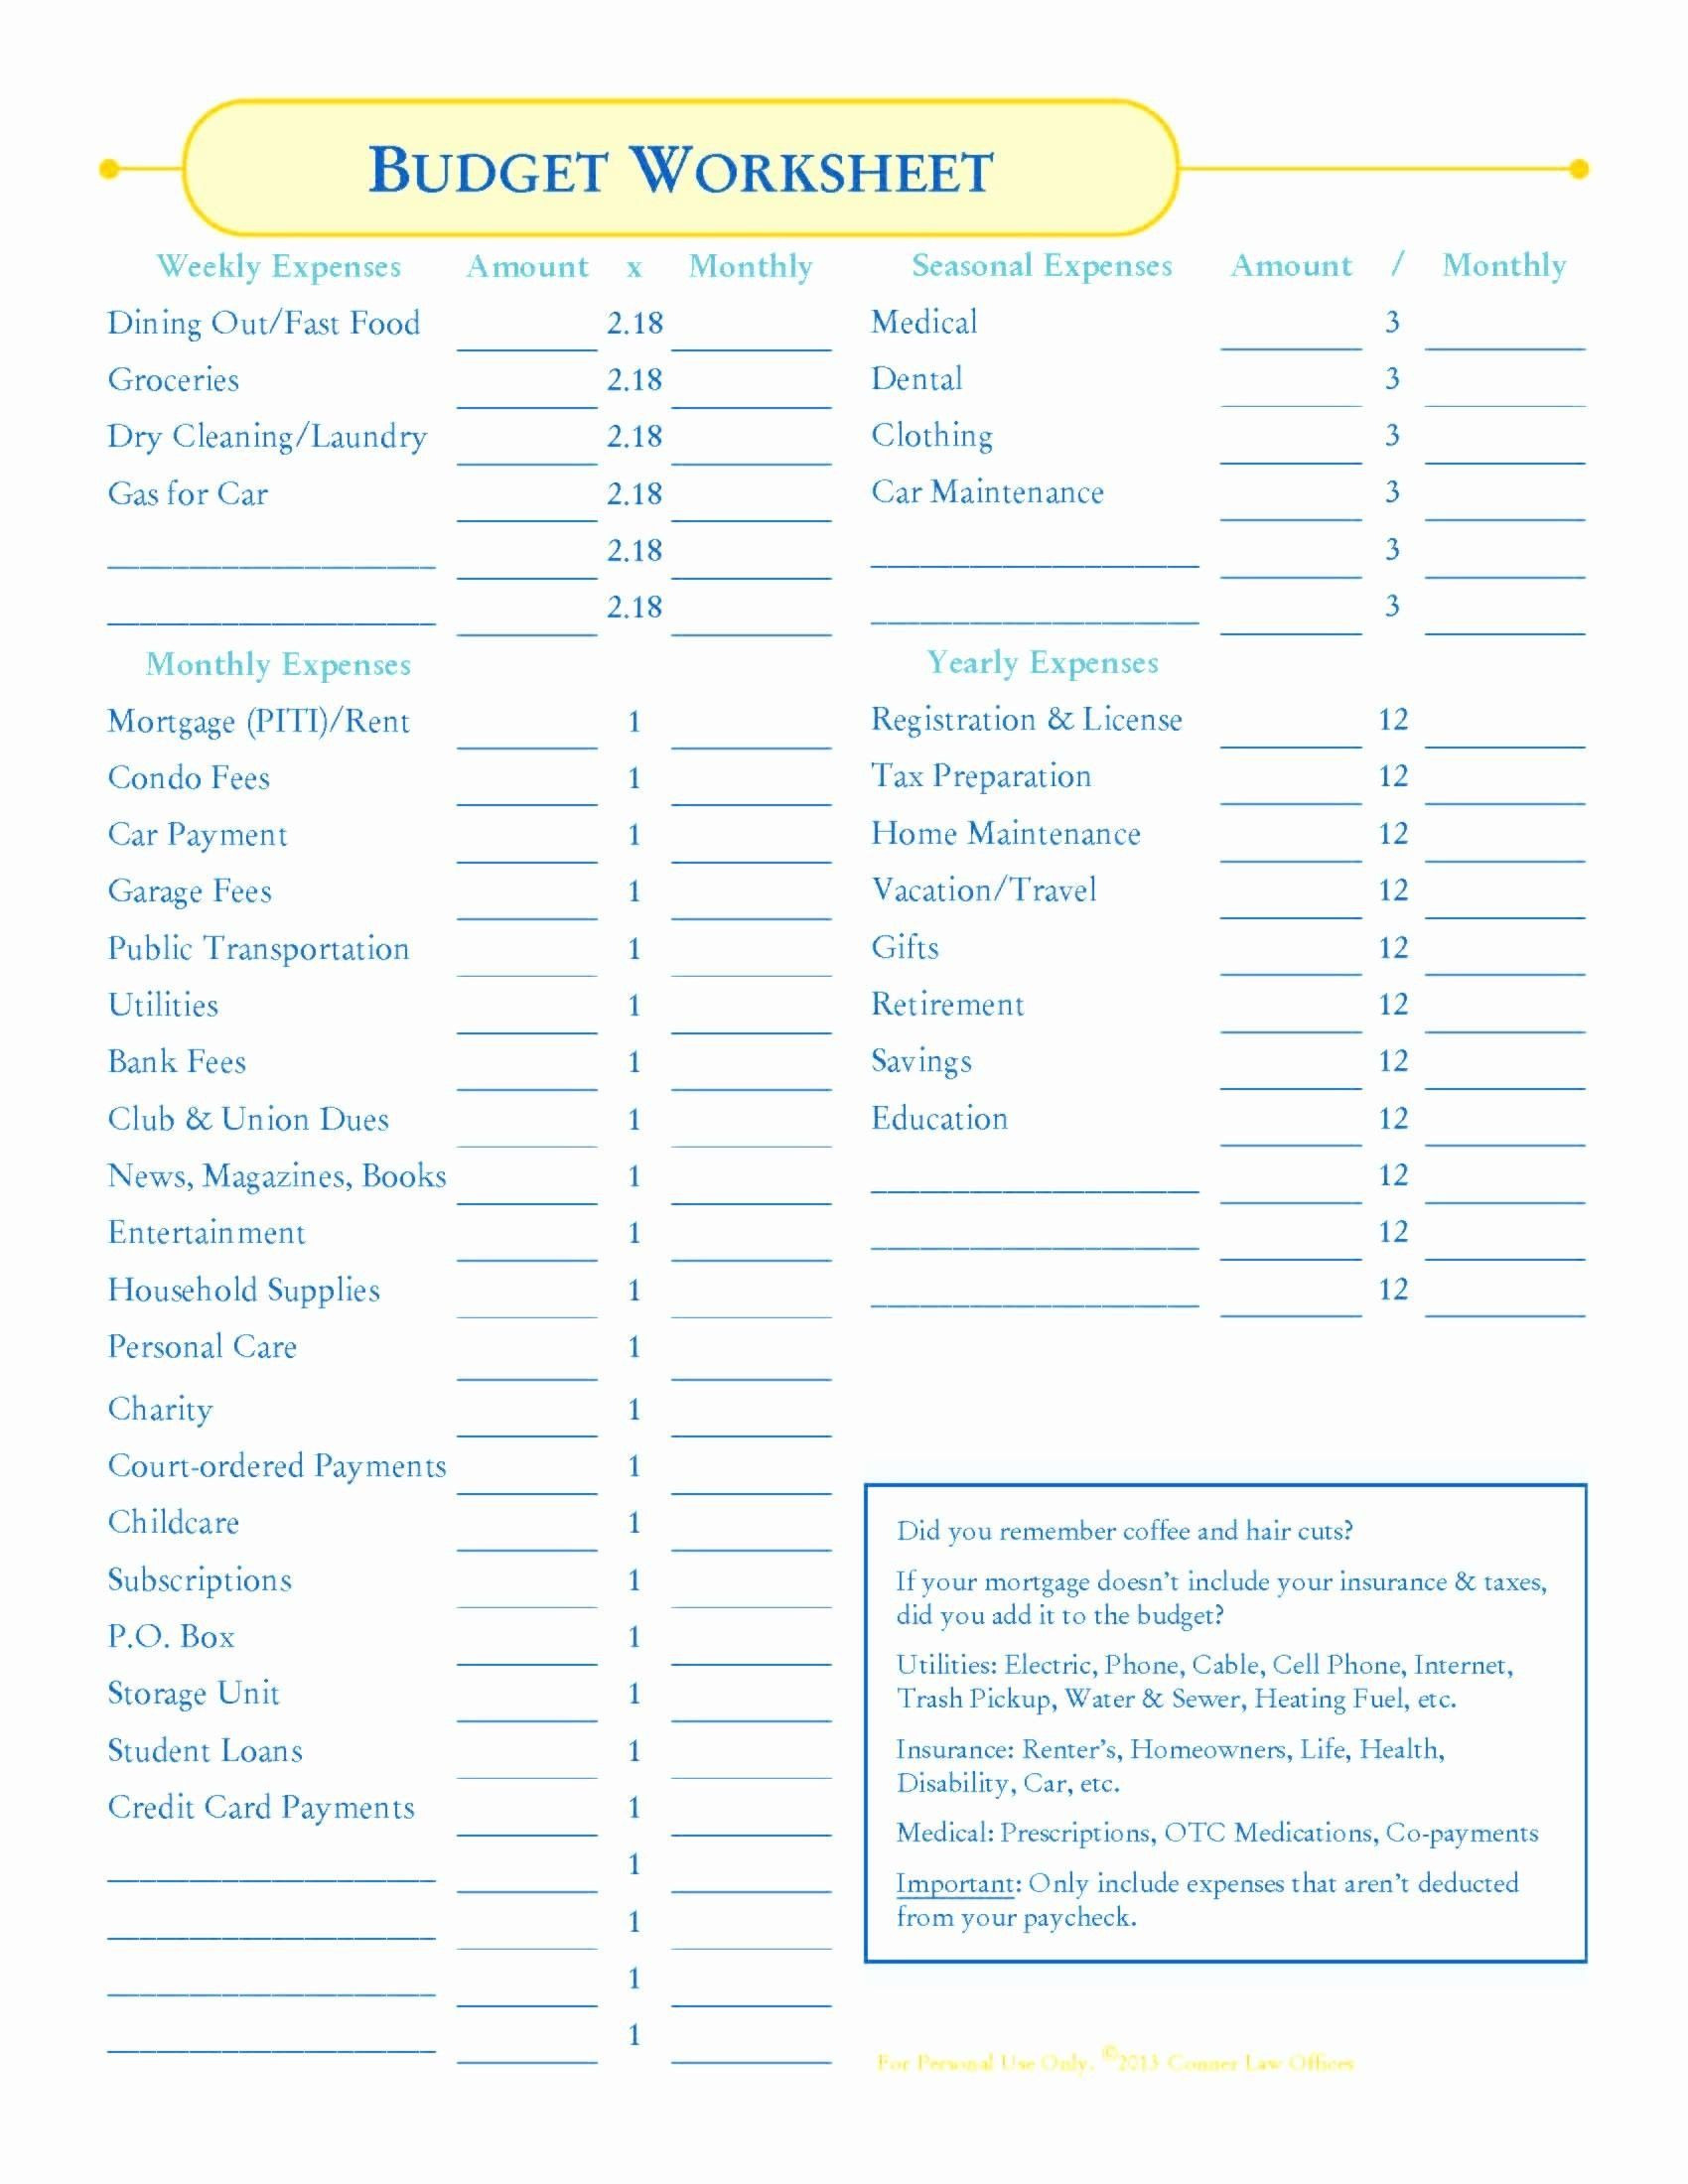 budgeting-worksheets-for-students-db-excel